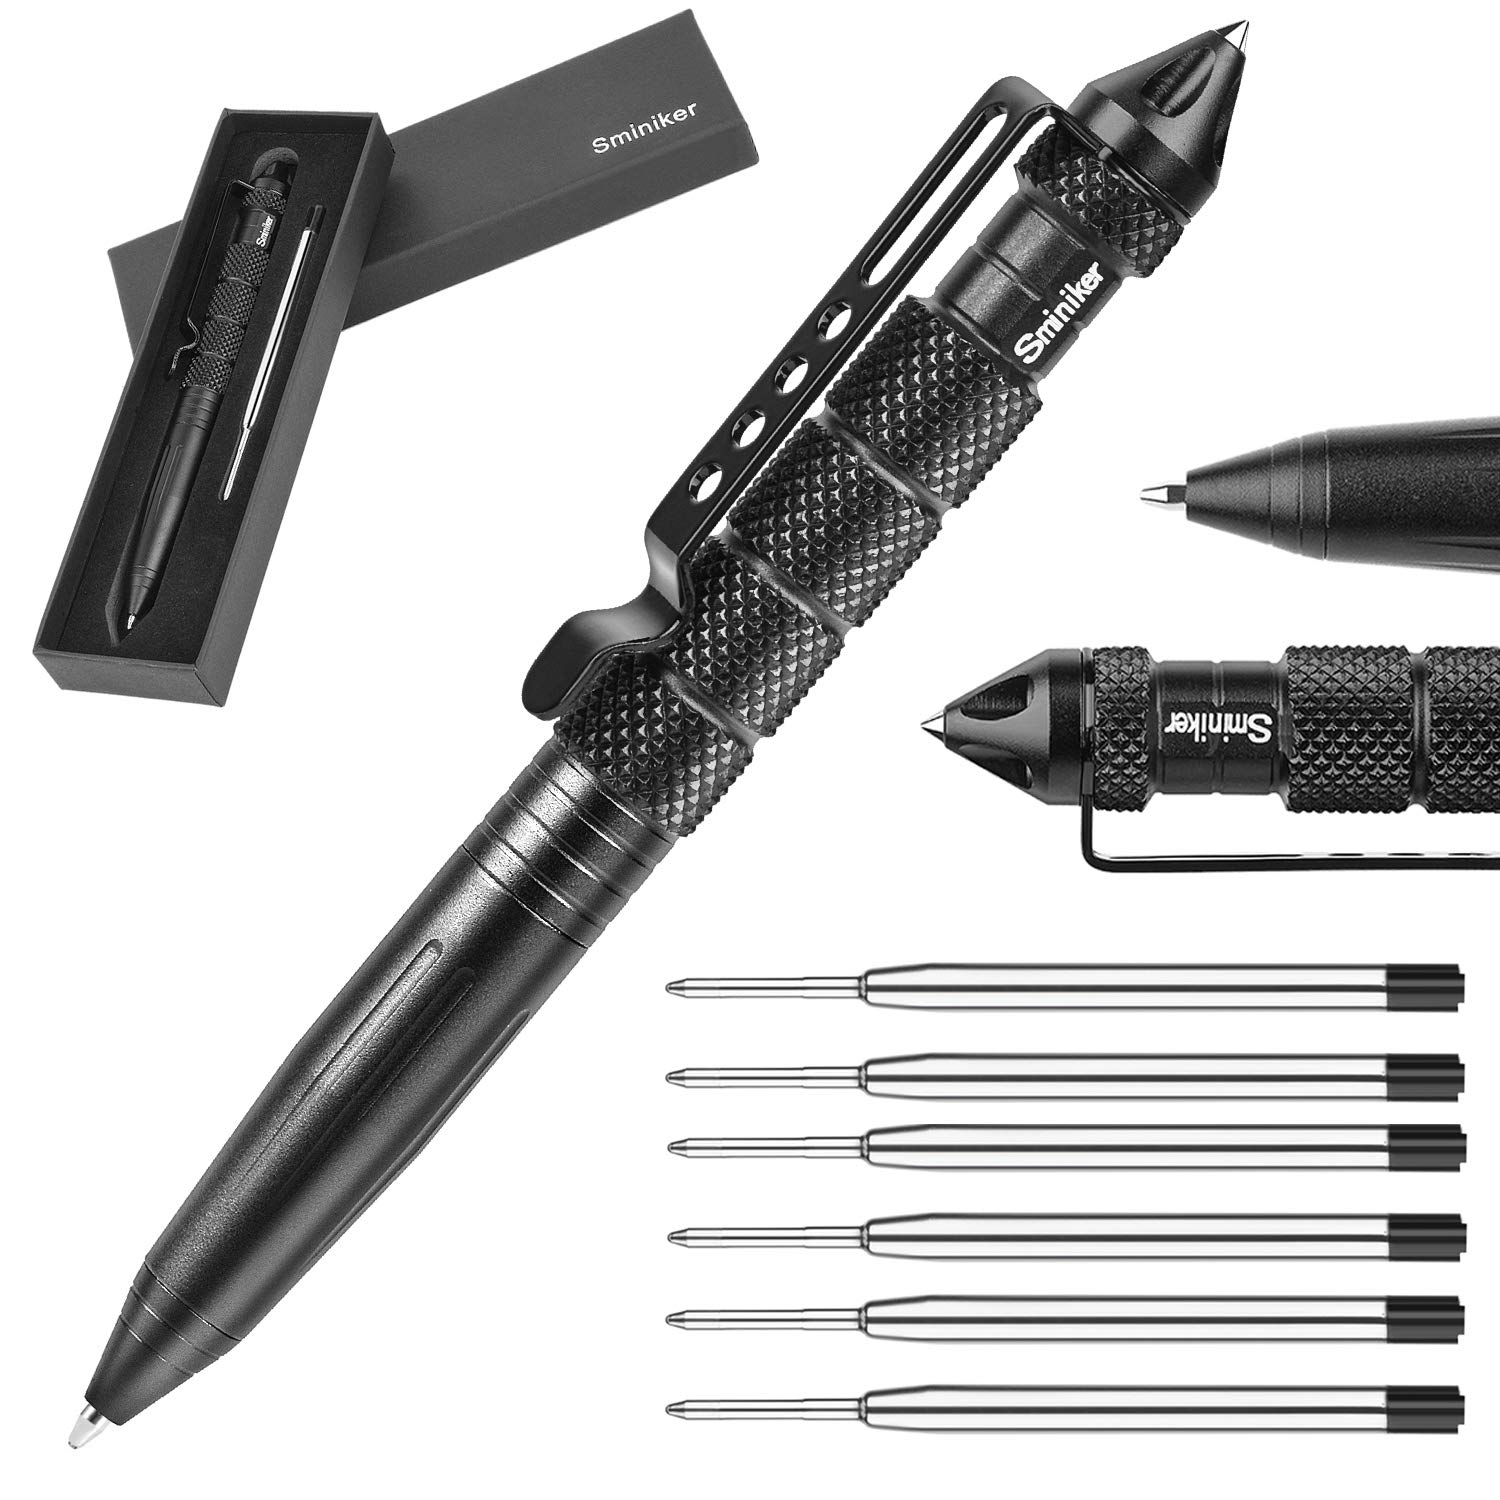 What is the difference between a tactical pen and a regular pen?